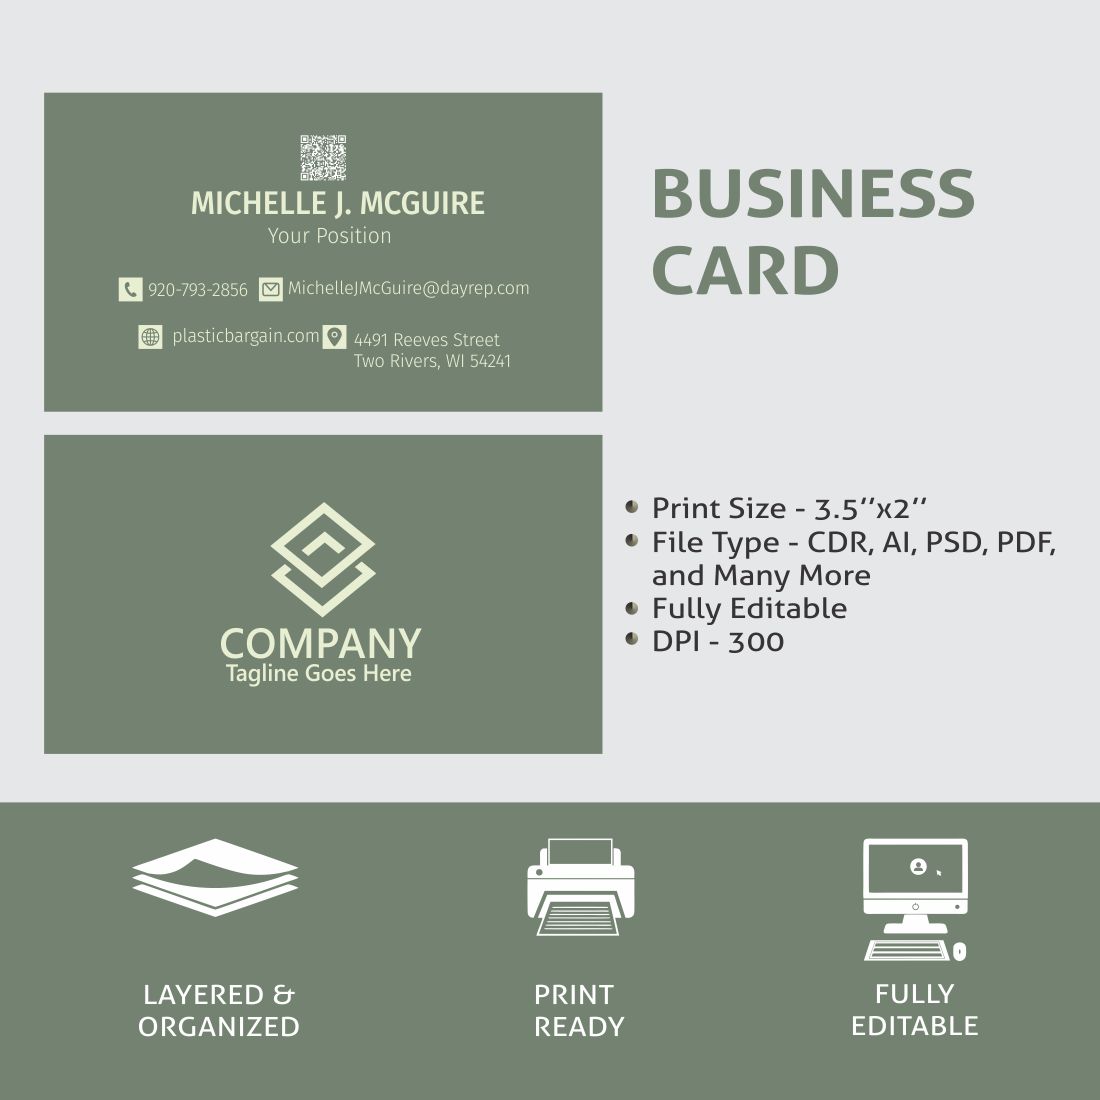 Business Card Temaplate cover image.